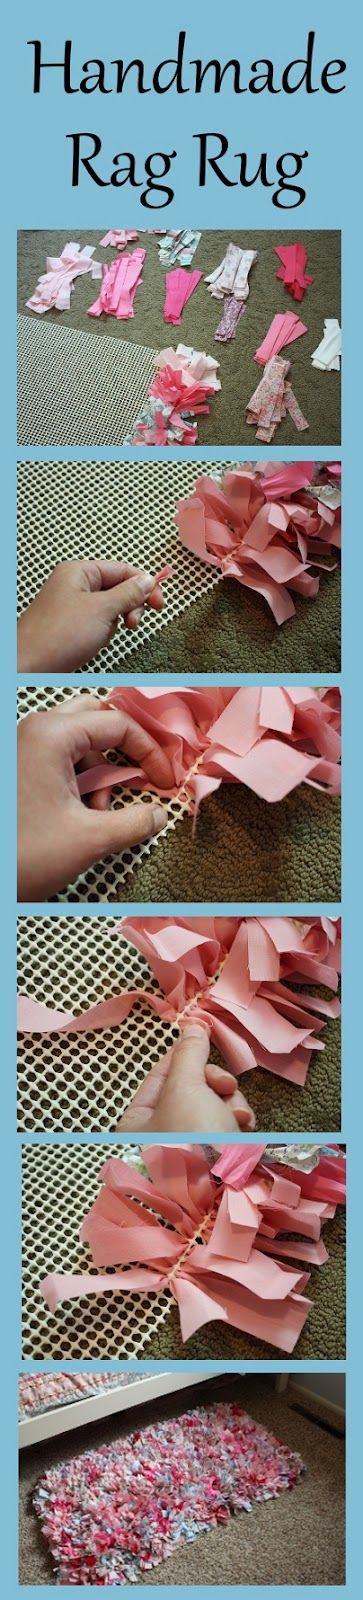 Easy rag rug tutorial. Perfect use for scrap fabric! – so smart to use a rug und